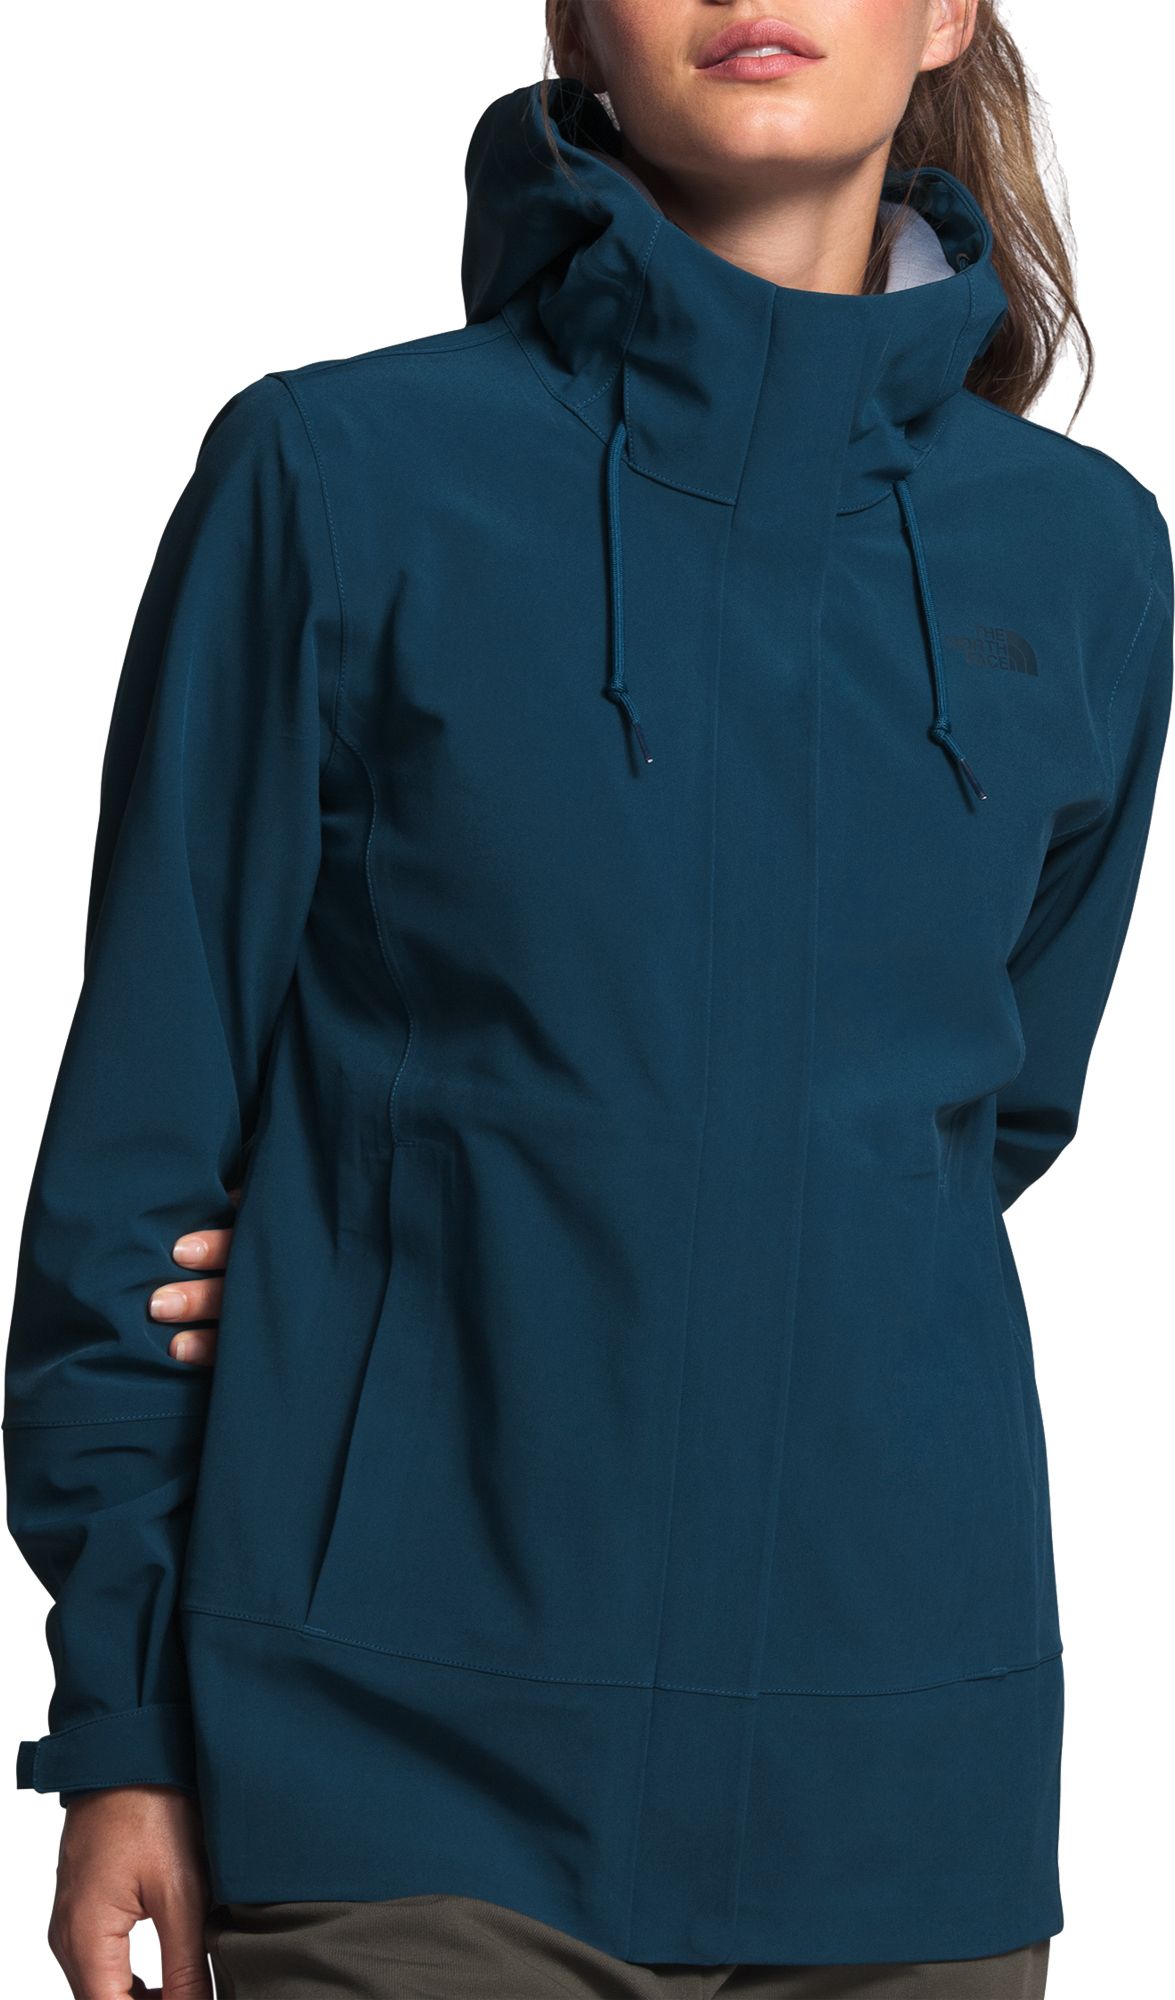 the north face women's apex jacket